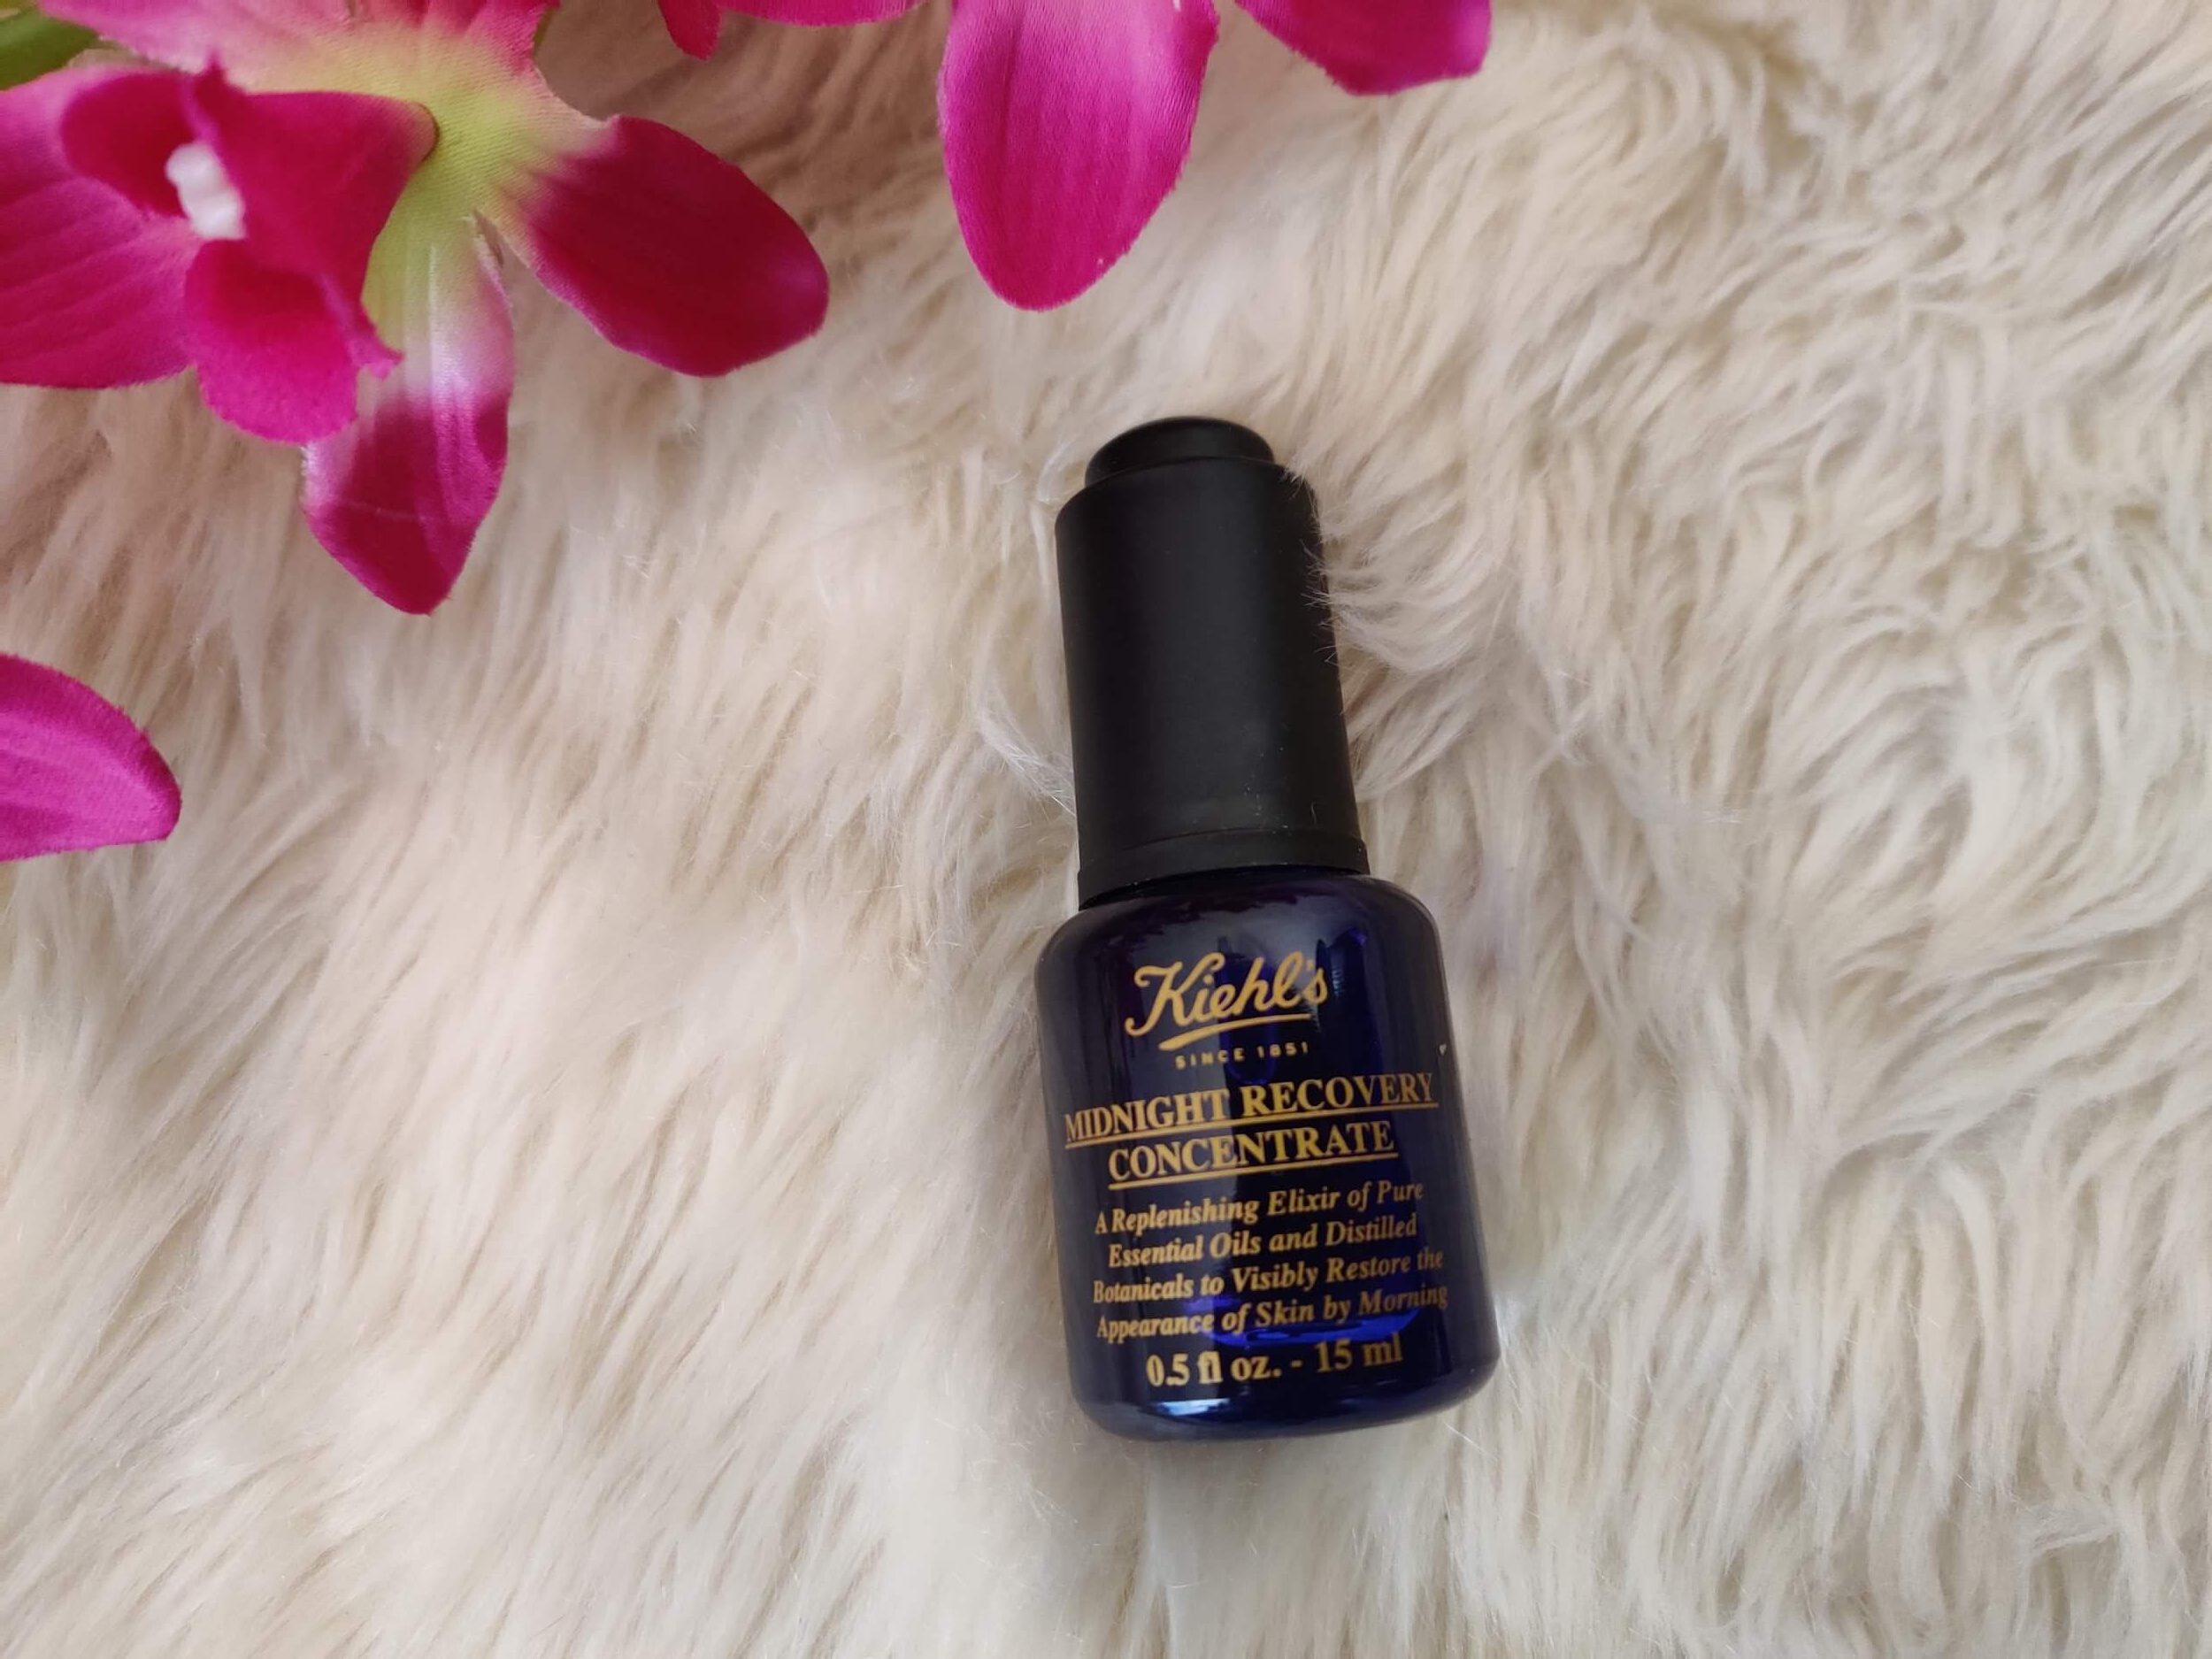 Kiehl’s Midnight Recovery Concentrate